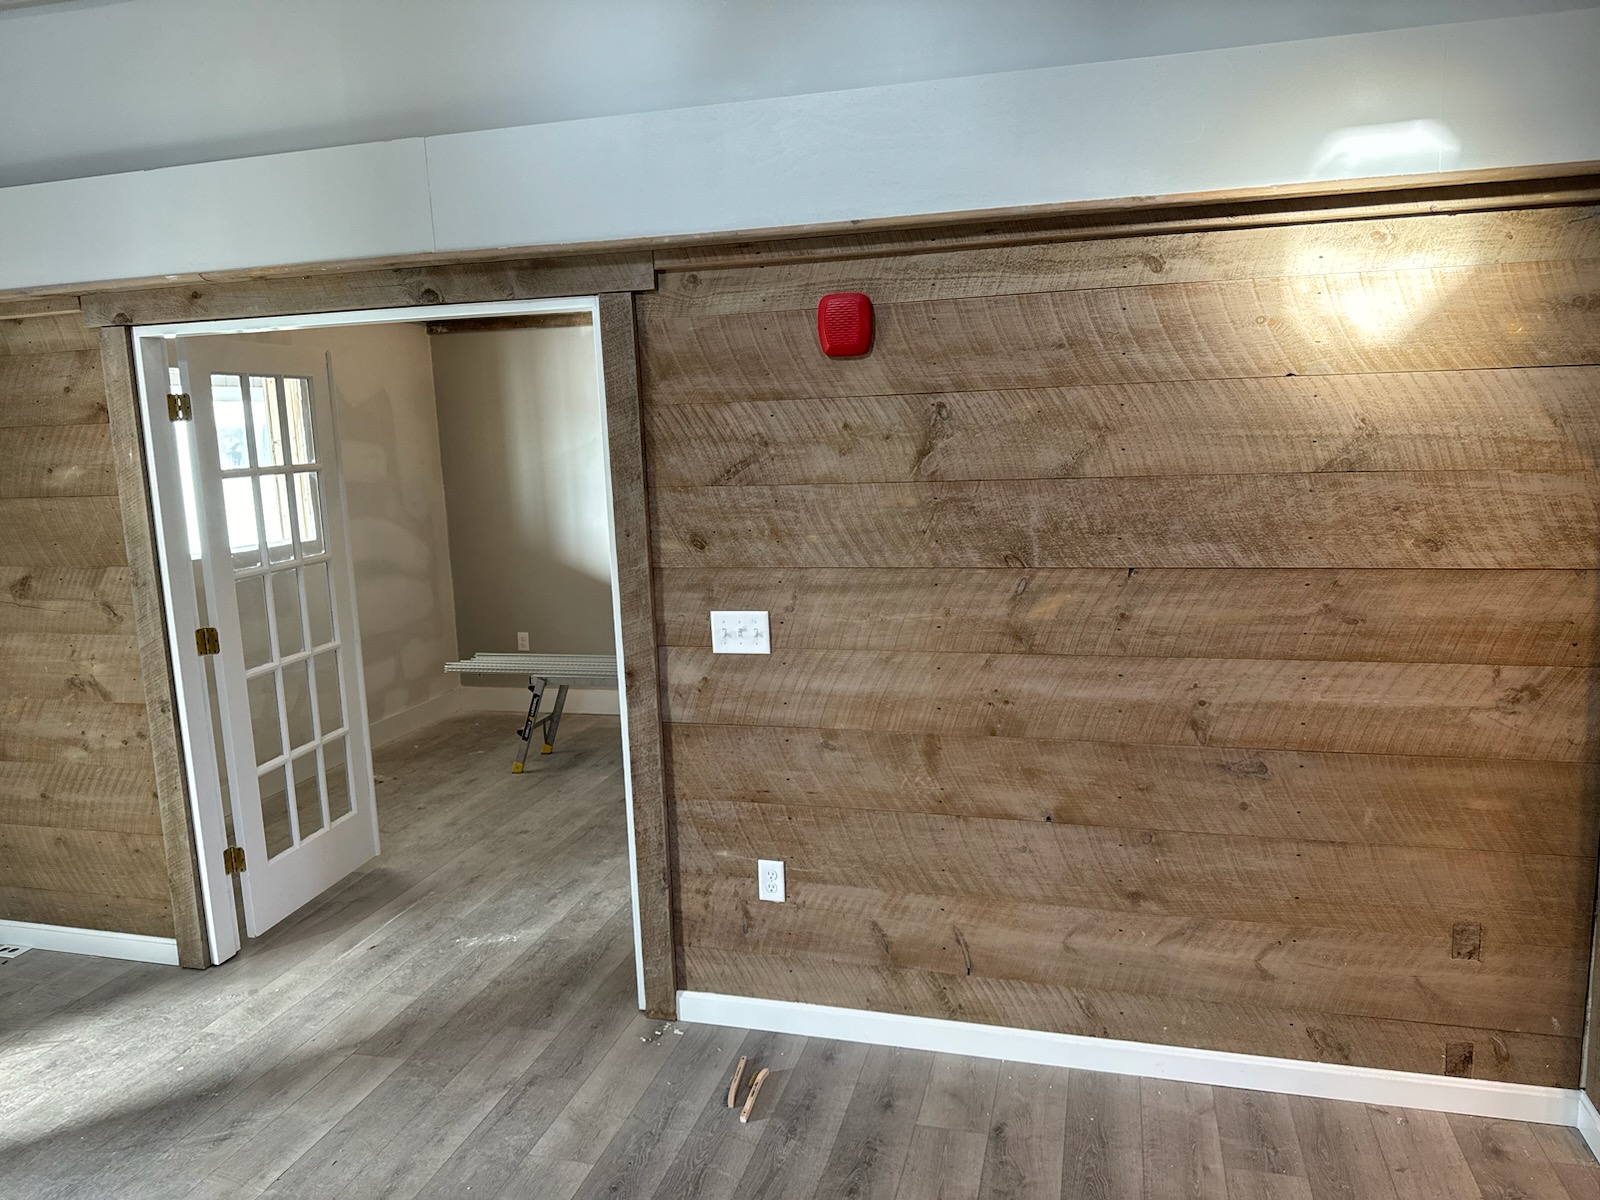 The craftsman from Northfield Handyman added a new accent wall using barn board in Portsmouth NH.

Rental properties require fast, cost-effective maintenance to keep units in top condition. Every day that a unit sits empty means lost income.  Don’t lose money with time-consuming turnovers. Contact Northfield Handyman Services today!